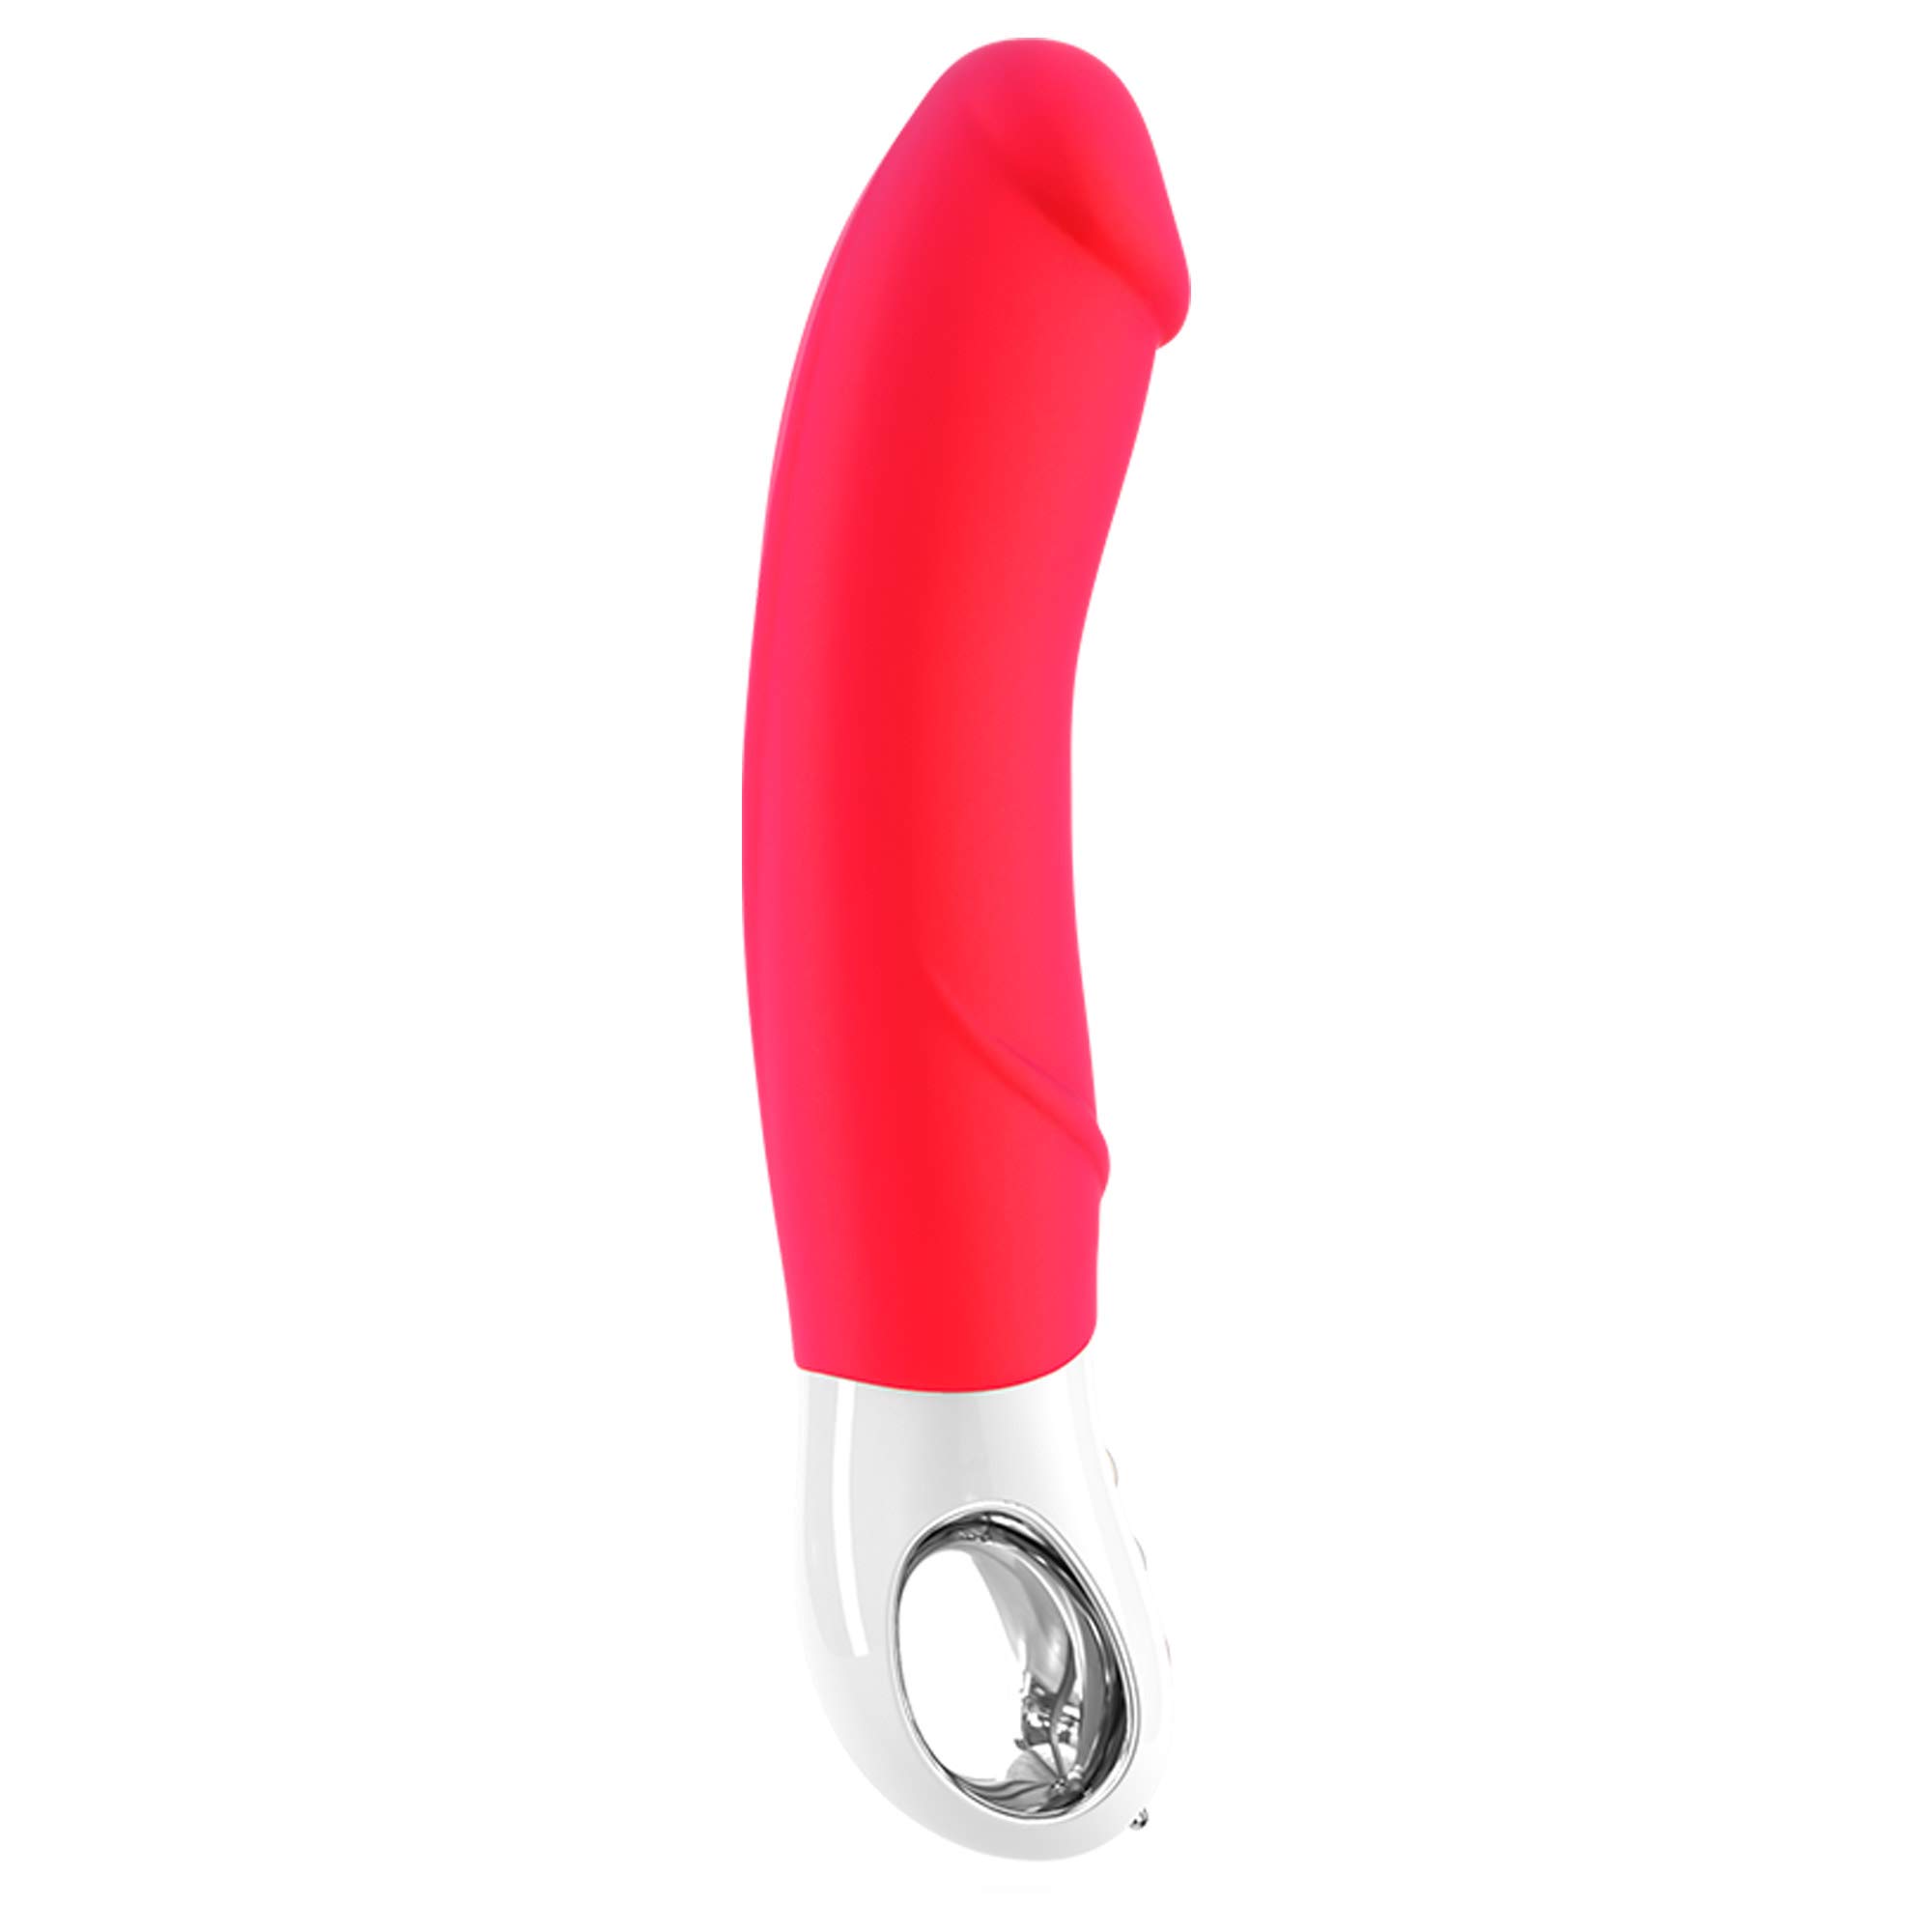 FUN FACTORY Adult Toys | G5 Series Silicone Dildo Rechargeable Vibrator | Luxury Sex Toys for Women and Sex Toys for Men (Big Boss Pink) Big Boss-pink